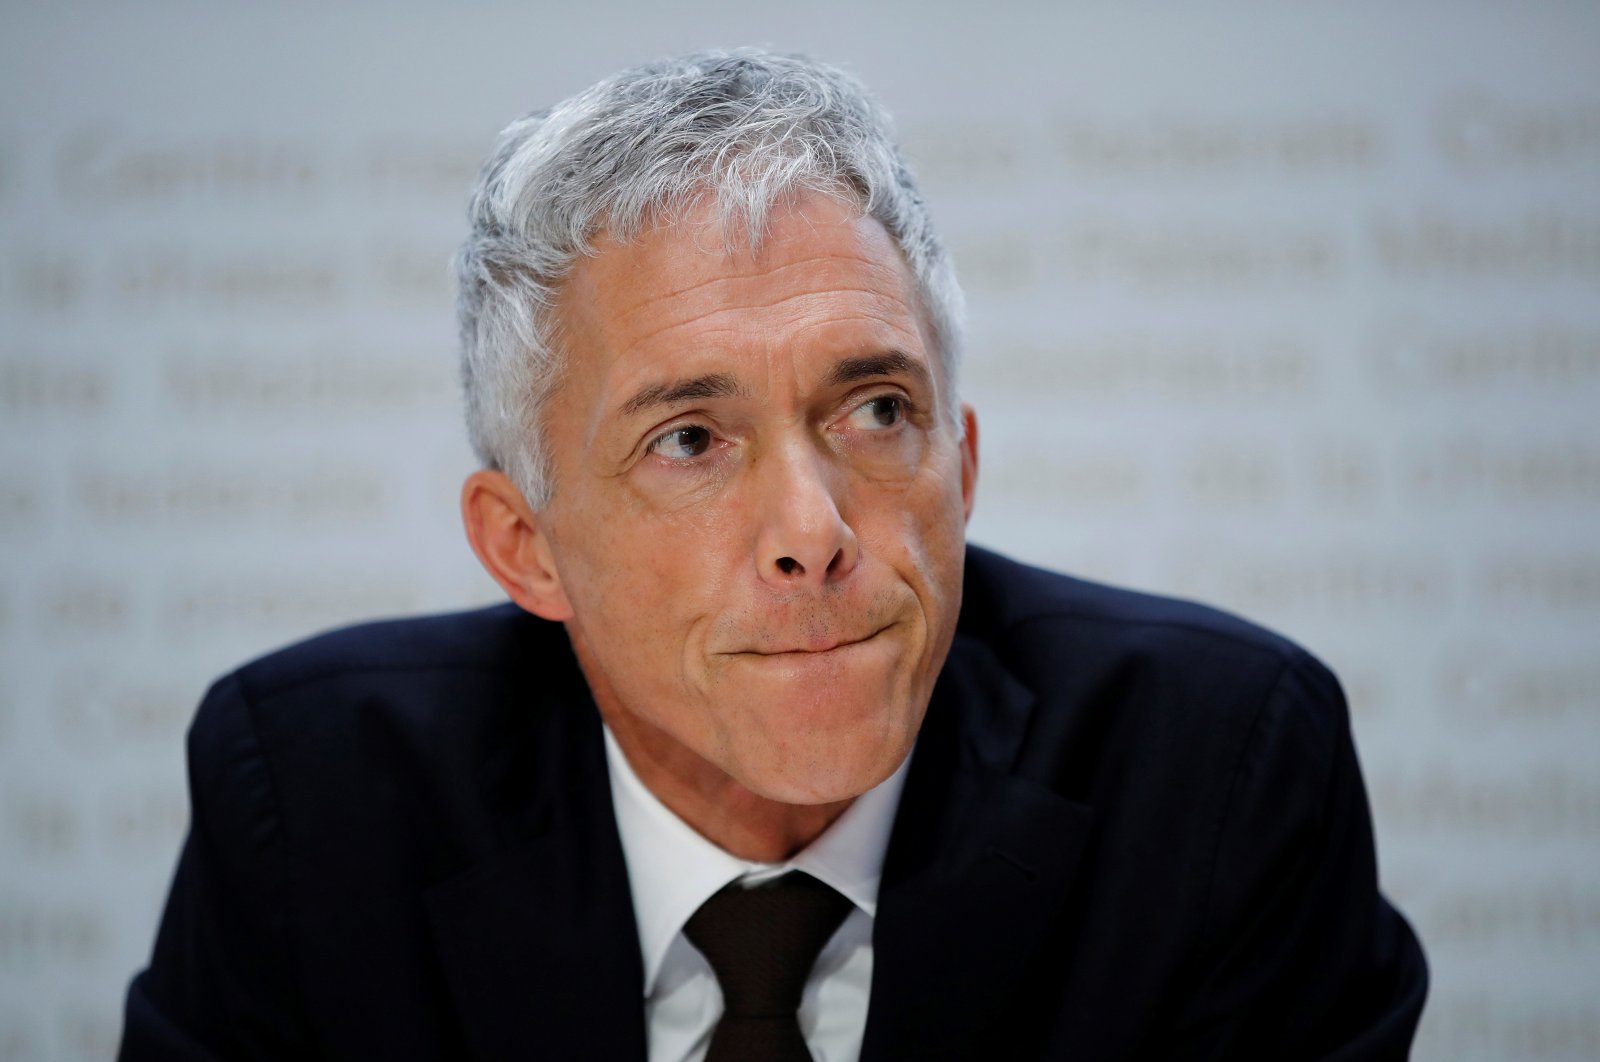 Swiss attorney general Michael Lauber during a press conference in Bern, Switzerland, May 10, 2019. (AFP Photo)